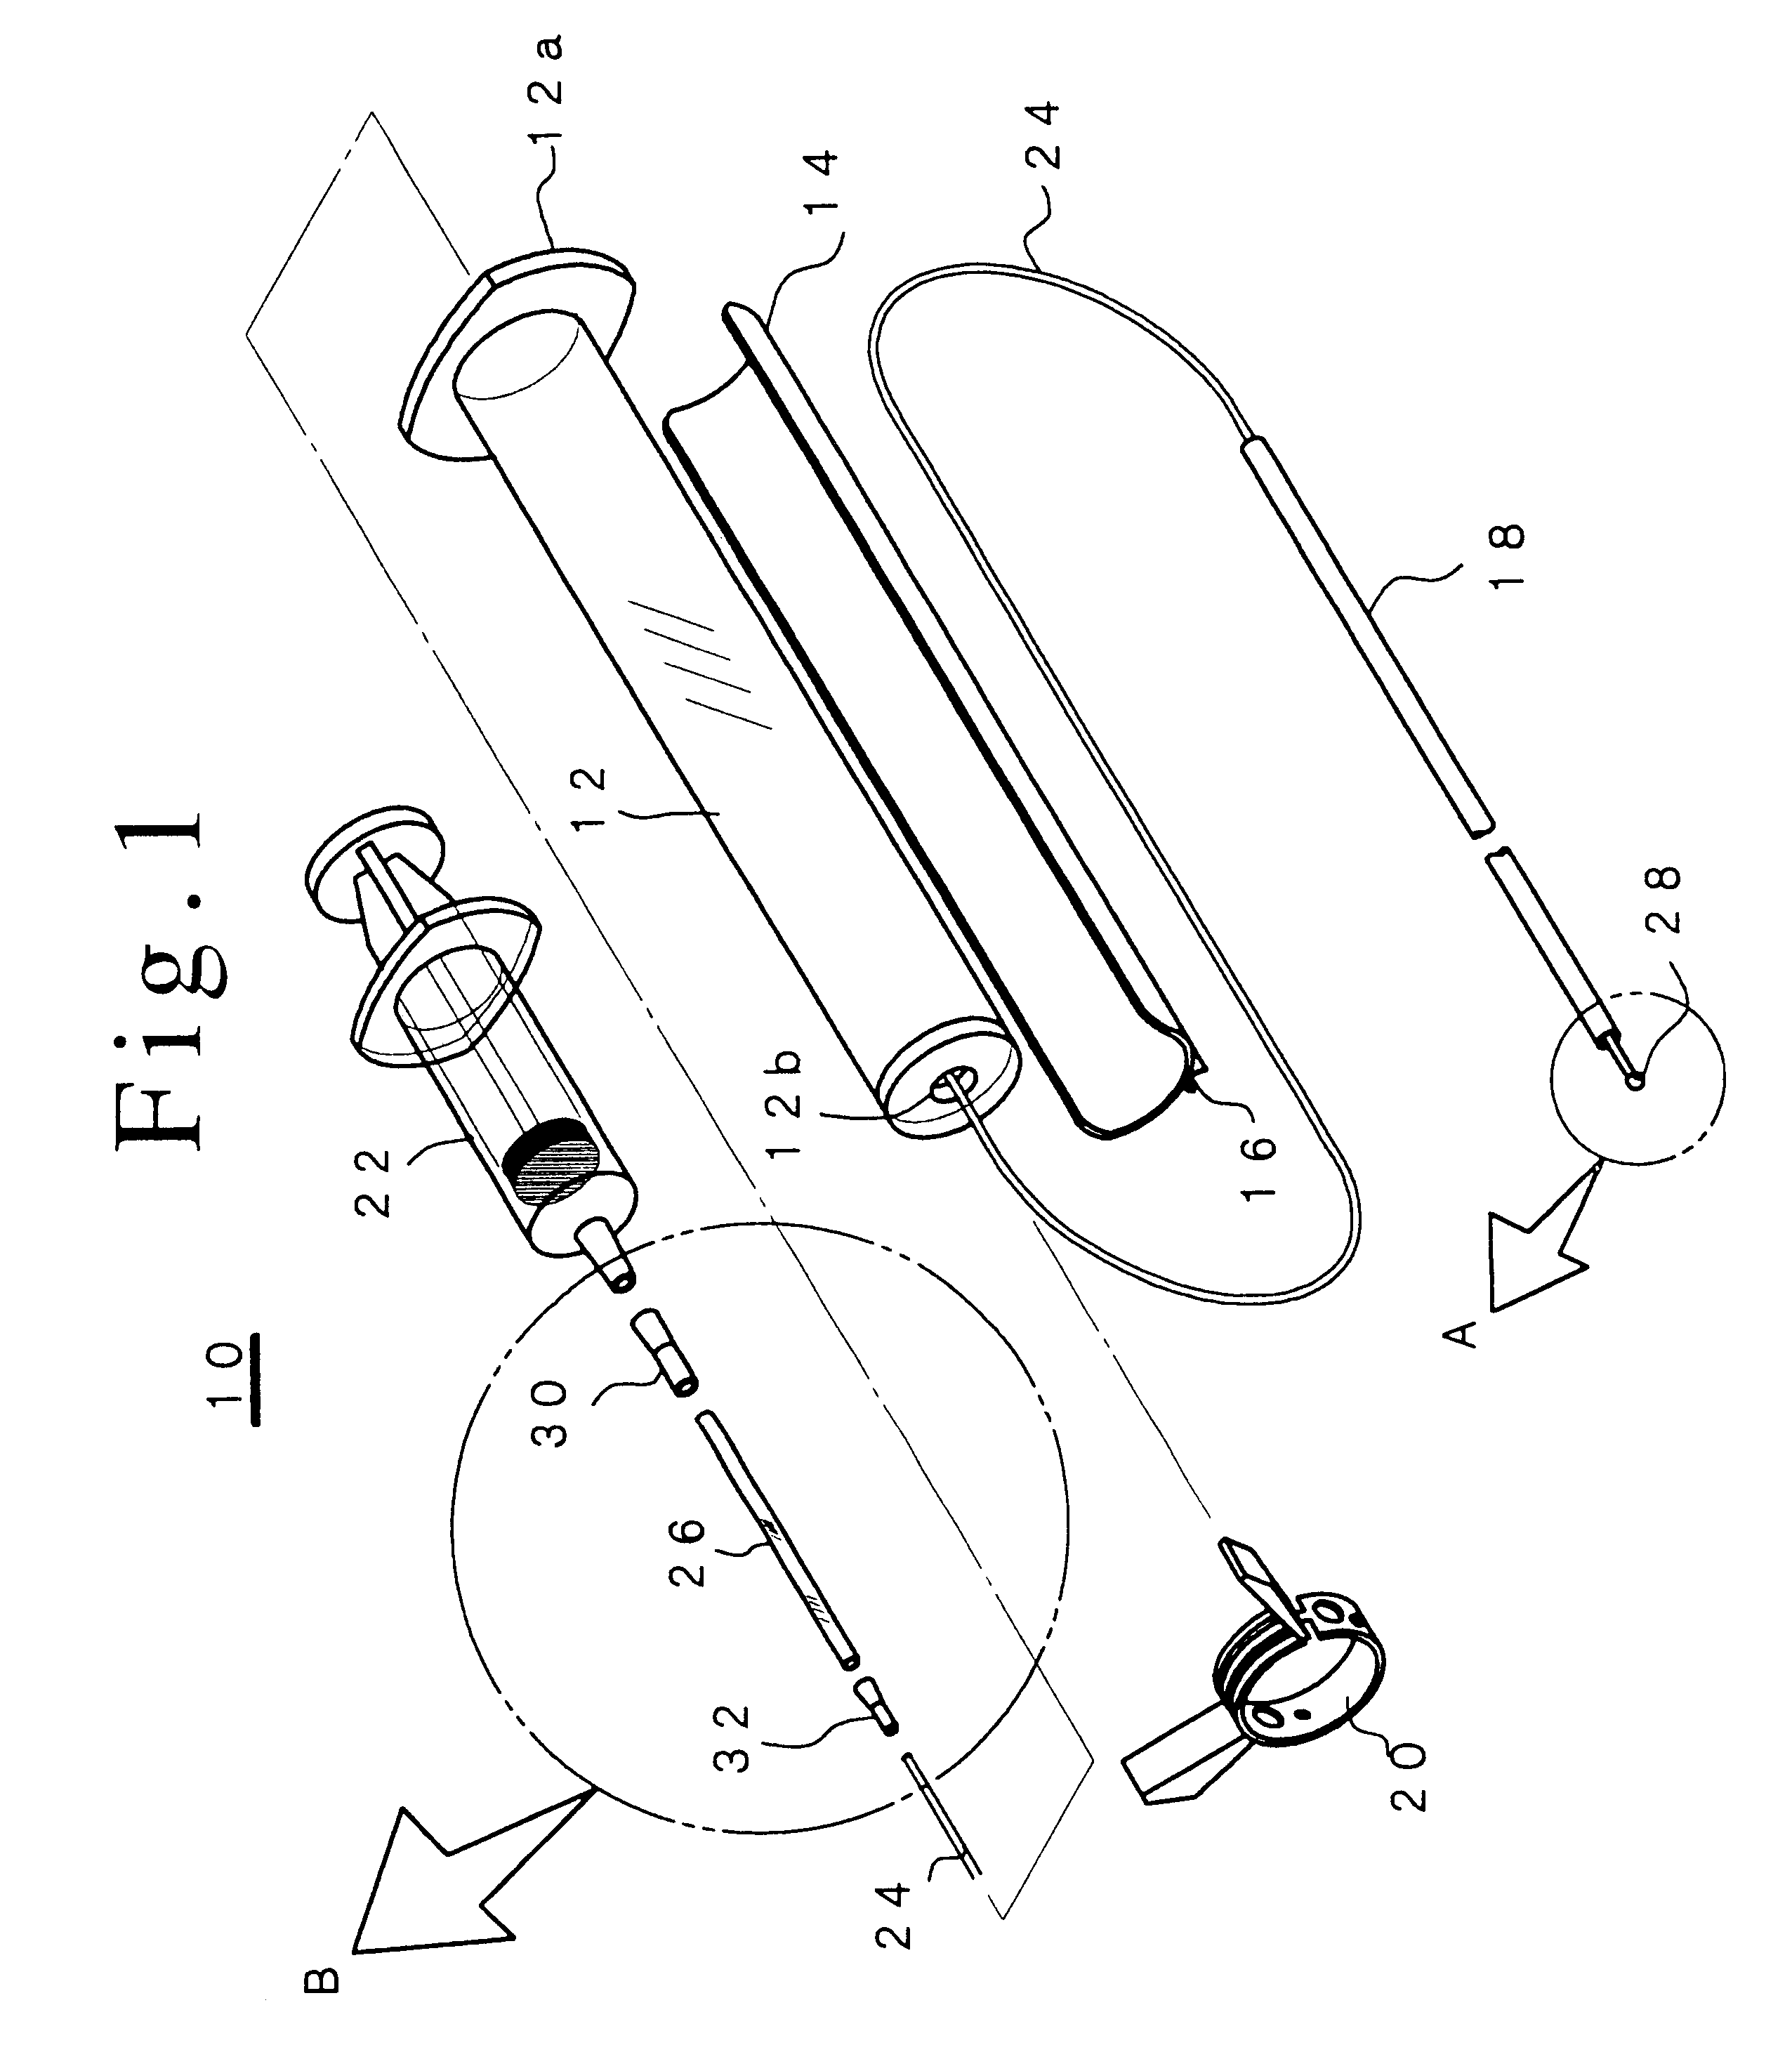 Injector of sperm for artificial insemination or fertilized ovum for transplantation of domestic animal and method of operating thereof